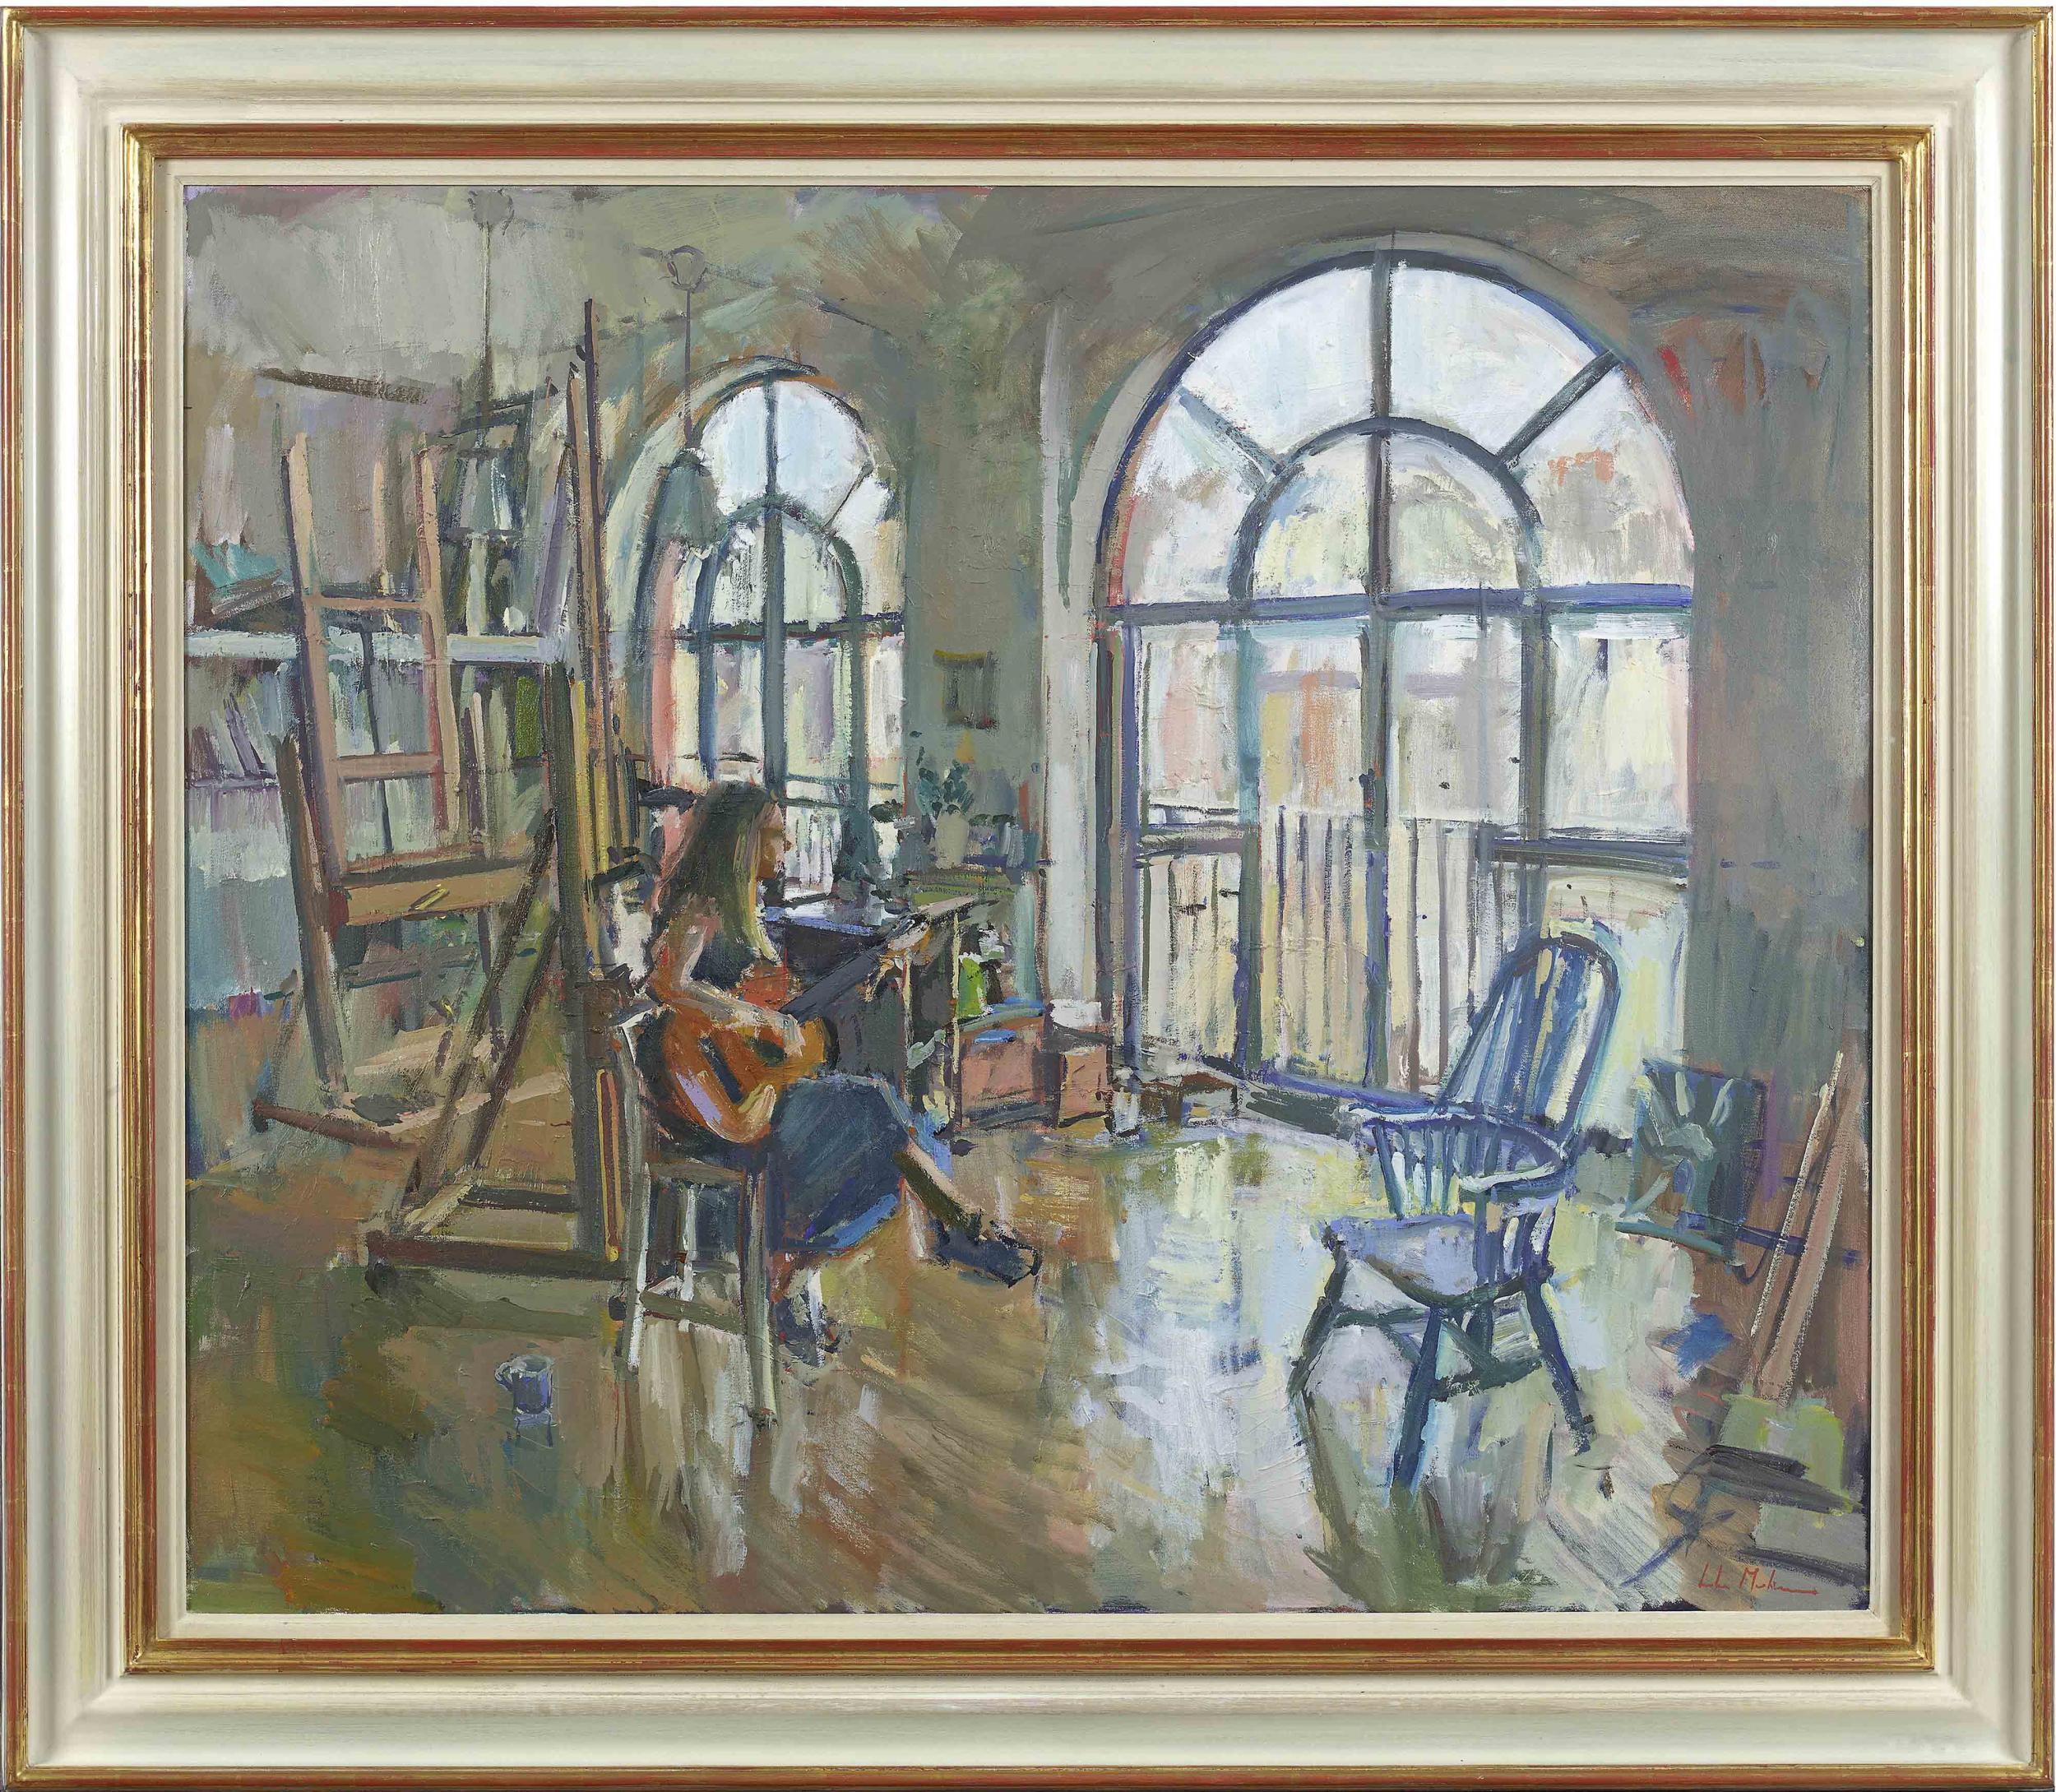 The Guitarist - Painting by Luke Martineau